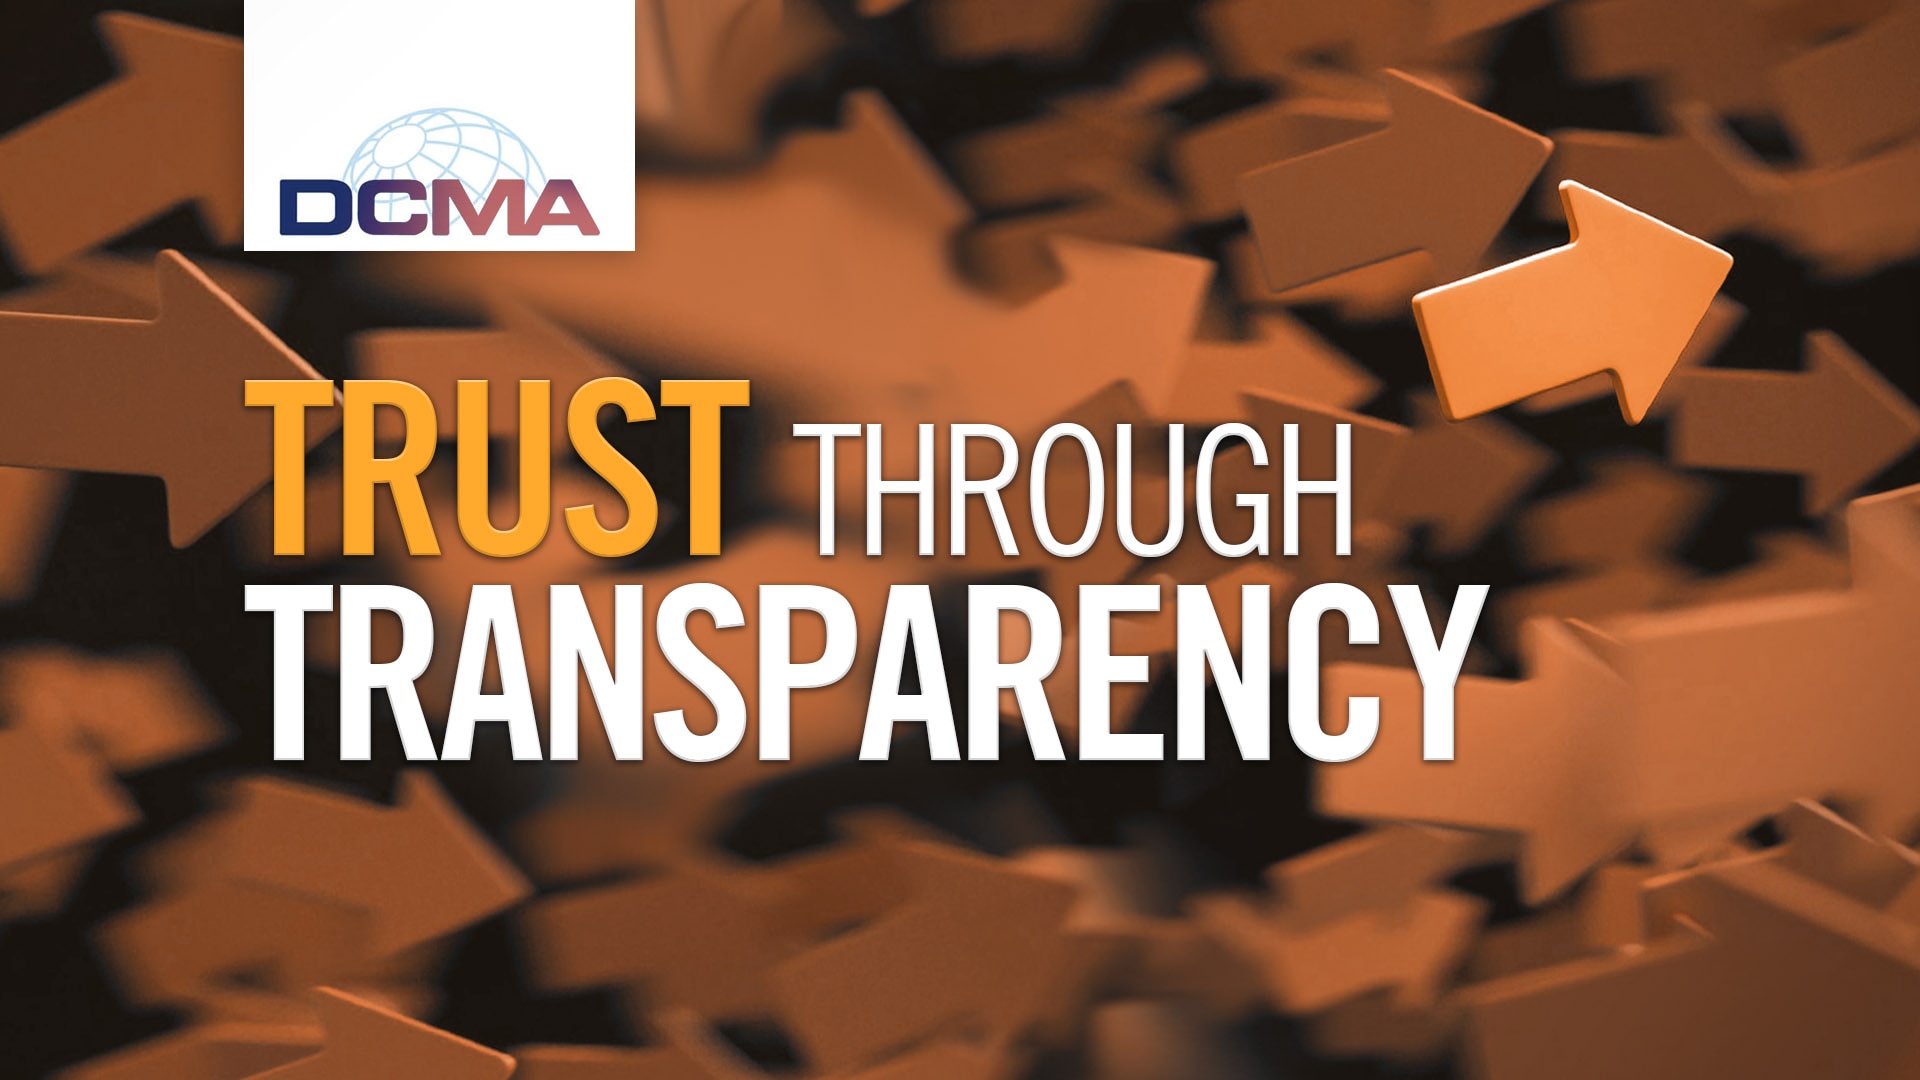 Graphic that says "Trust through Transparency"